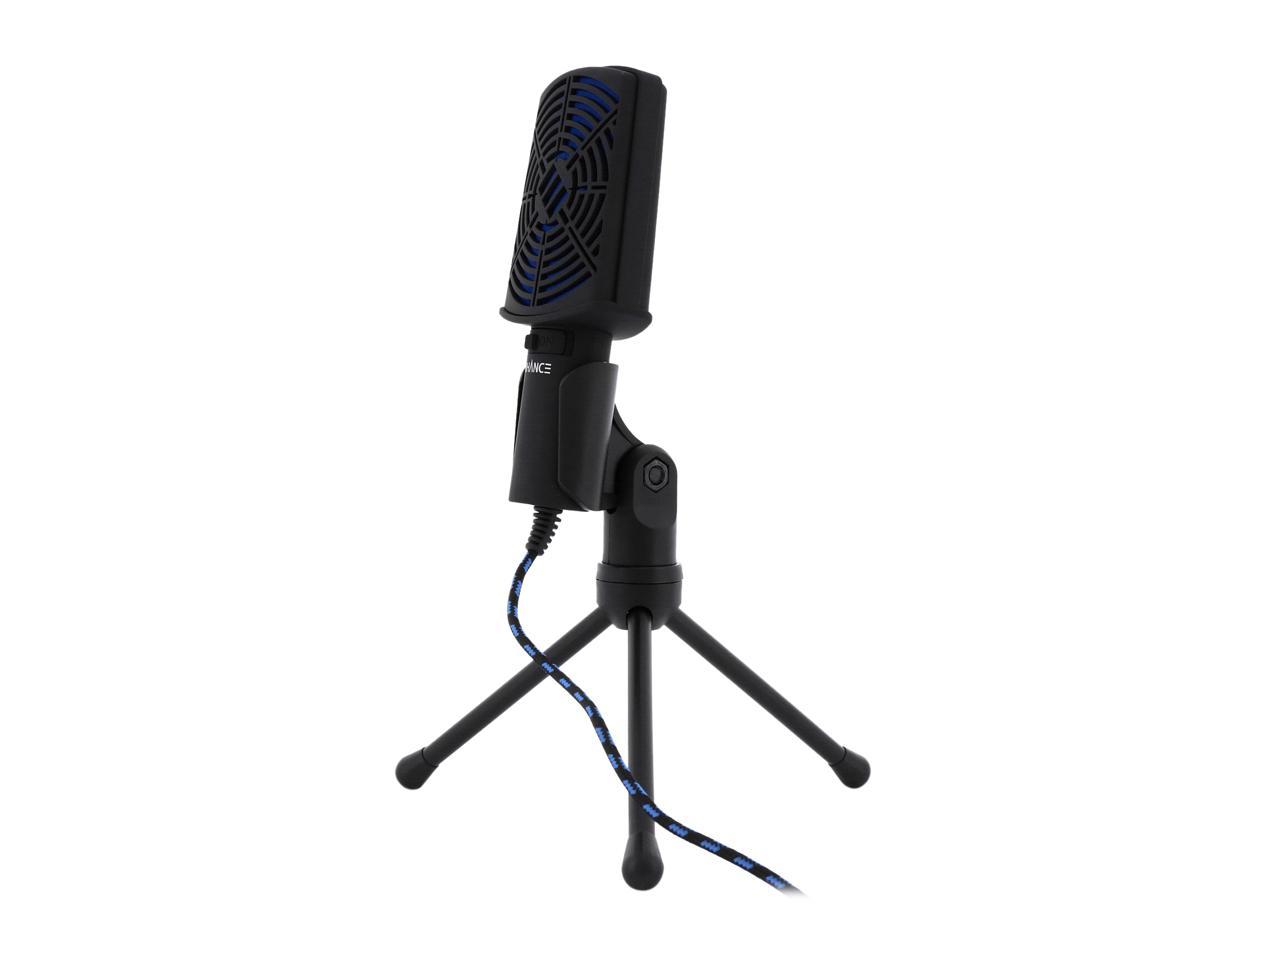 table microphone for skype calls